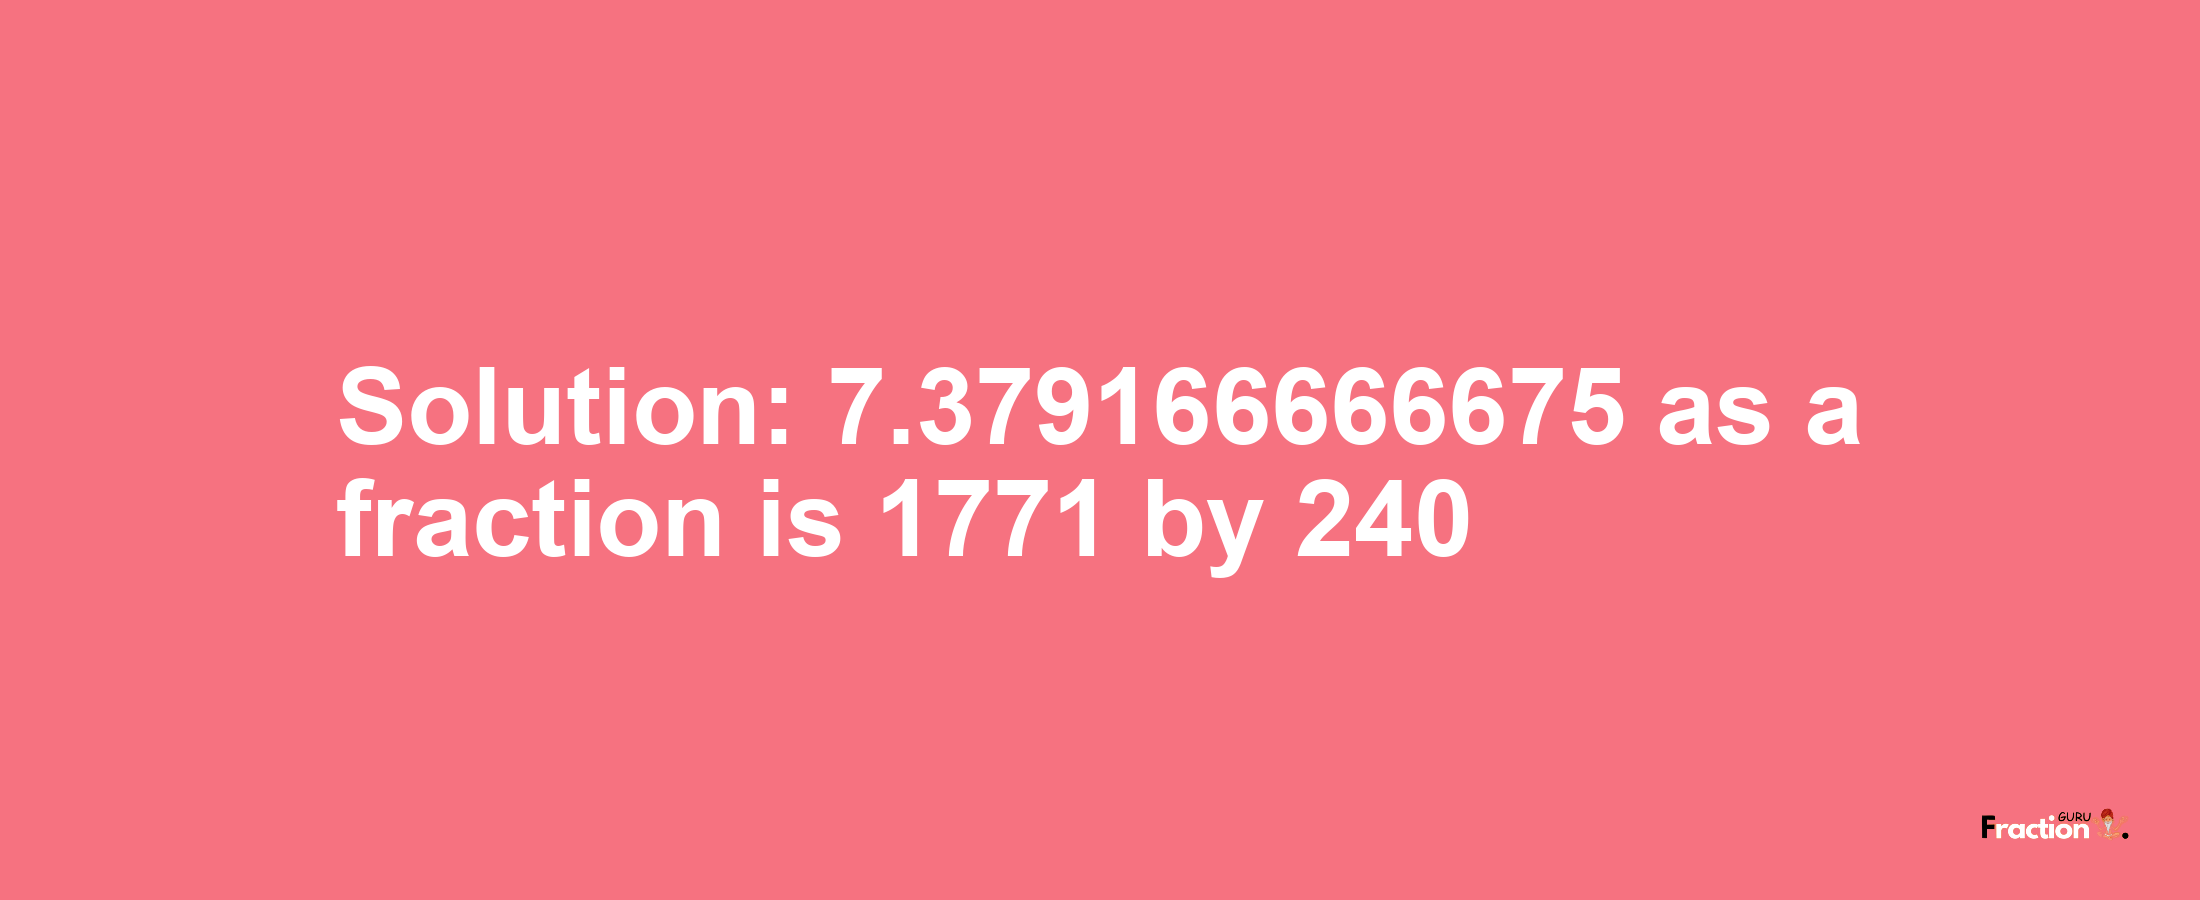 Solution:7.379166666675 as a fraction is 1771/240